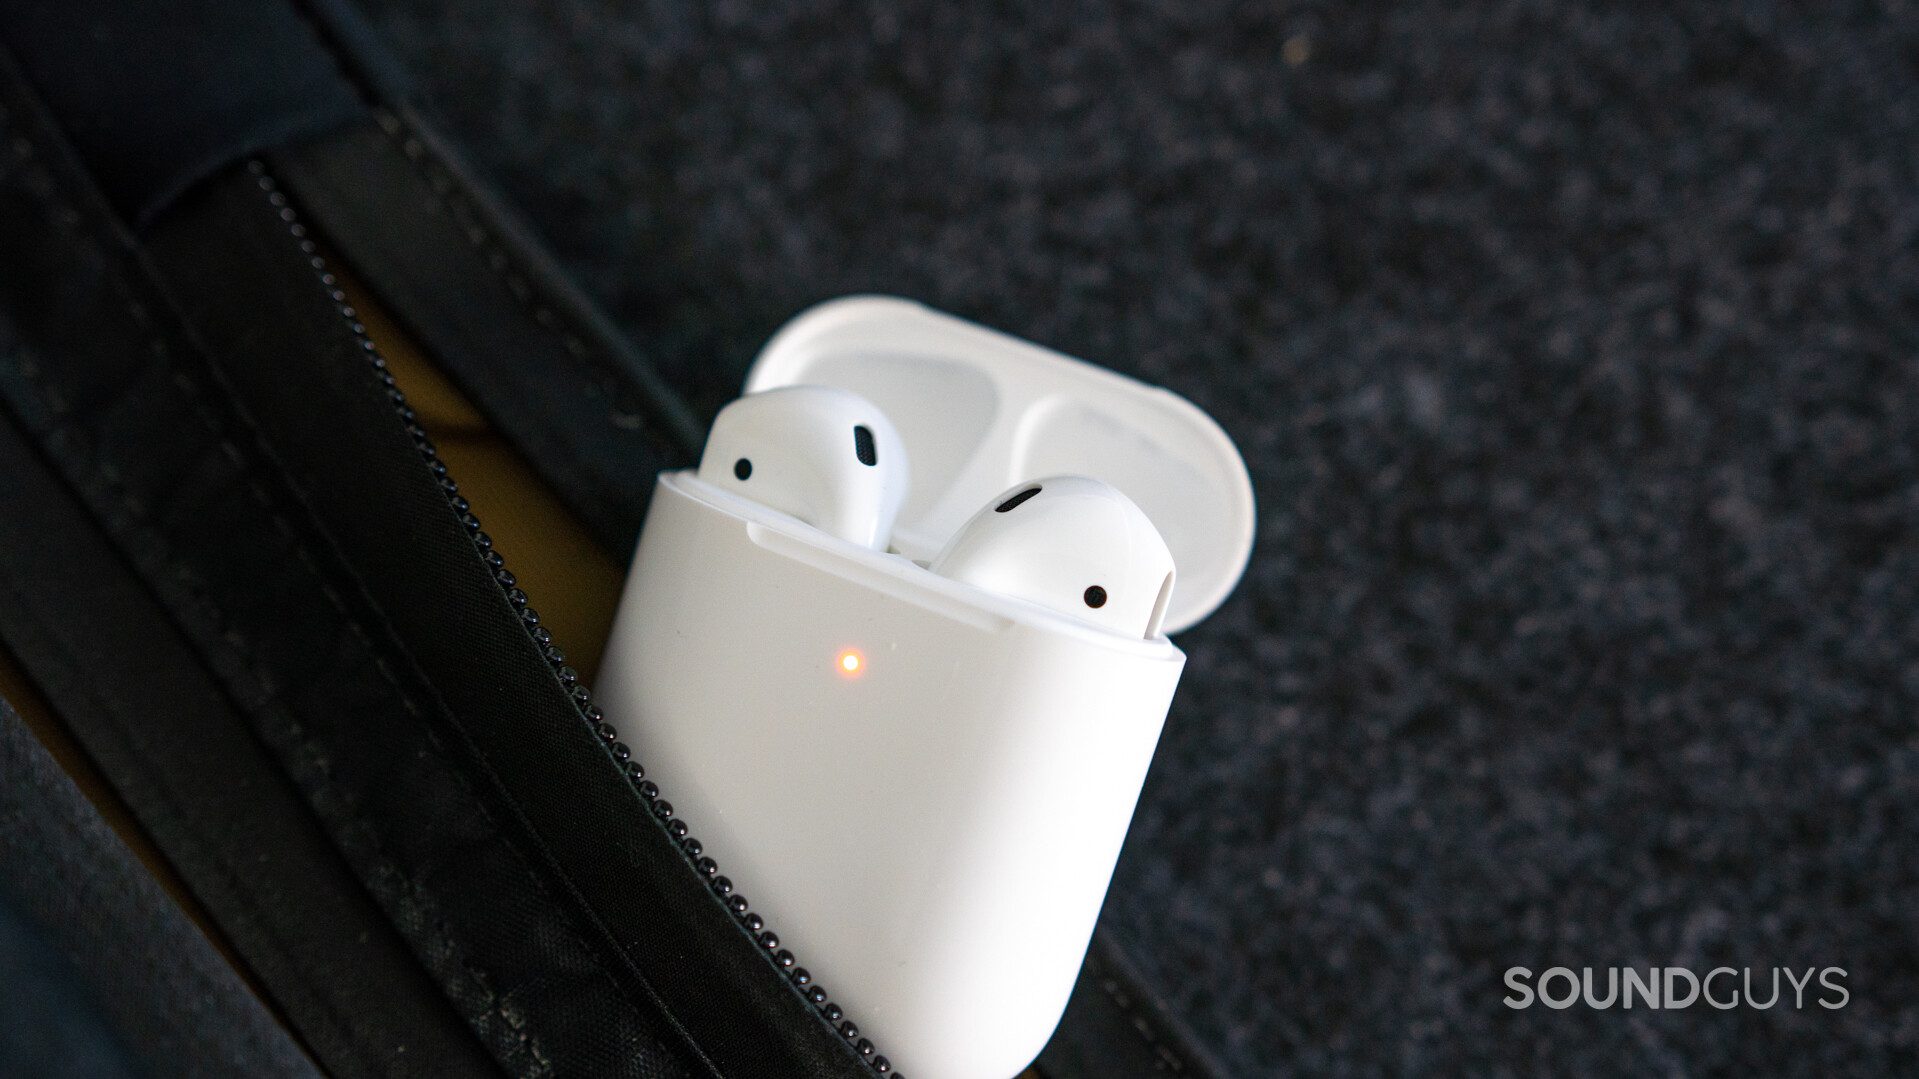 Pictured is the Airpods case with the 'buds inside.